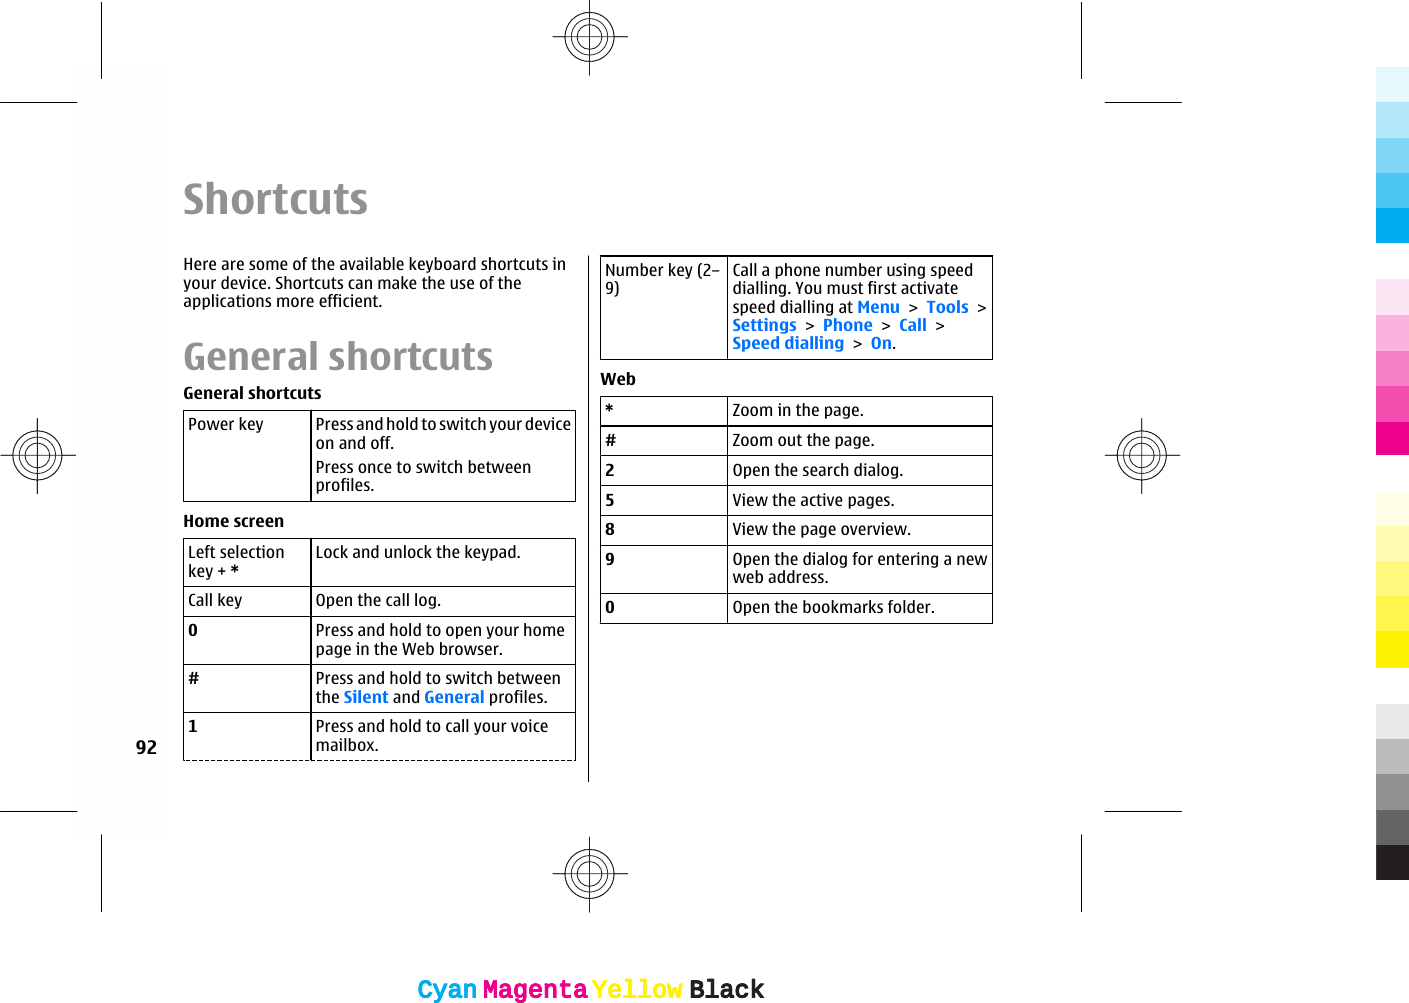 ShortcutsHere are some of the available keyboard shortcuts inyour device. Shortcuts can make the use of theapplications more efficient.General shortcutsGeneral shortcutsPower key Press and hold to switch your deviceon and off.Press once to switch betweenprofiles.Home screenLeft selectionkey + *Lock and unlock the keypad.Call key Open the call log.0Press and hold to open your homepage in the Web browser.#Press and hold to switch betweenthe Silent and General profiles.1Press and hold to call your voicemailbox.Number key (2–9)Call a phone number using speeddialling. You must first activatespeed dialling at Menu &gt; Tools &gt;Settings &gt; Phone &gt; Call &gt;Speed dialling &gt; On.Web*Zoom in the page.#Zoom out the page.2Open the search dialog.5View the active pages.8View the page overview.9Open the dialog for entering a newweb address.0Open the bookmarks folder.92CyanCyanMagentaMagentaYellowYellowBlackBlackCyanCyanMagentaMagentaYellowYellowBlackBlack